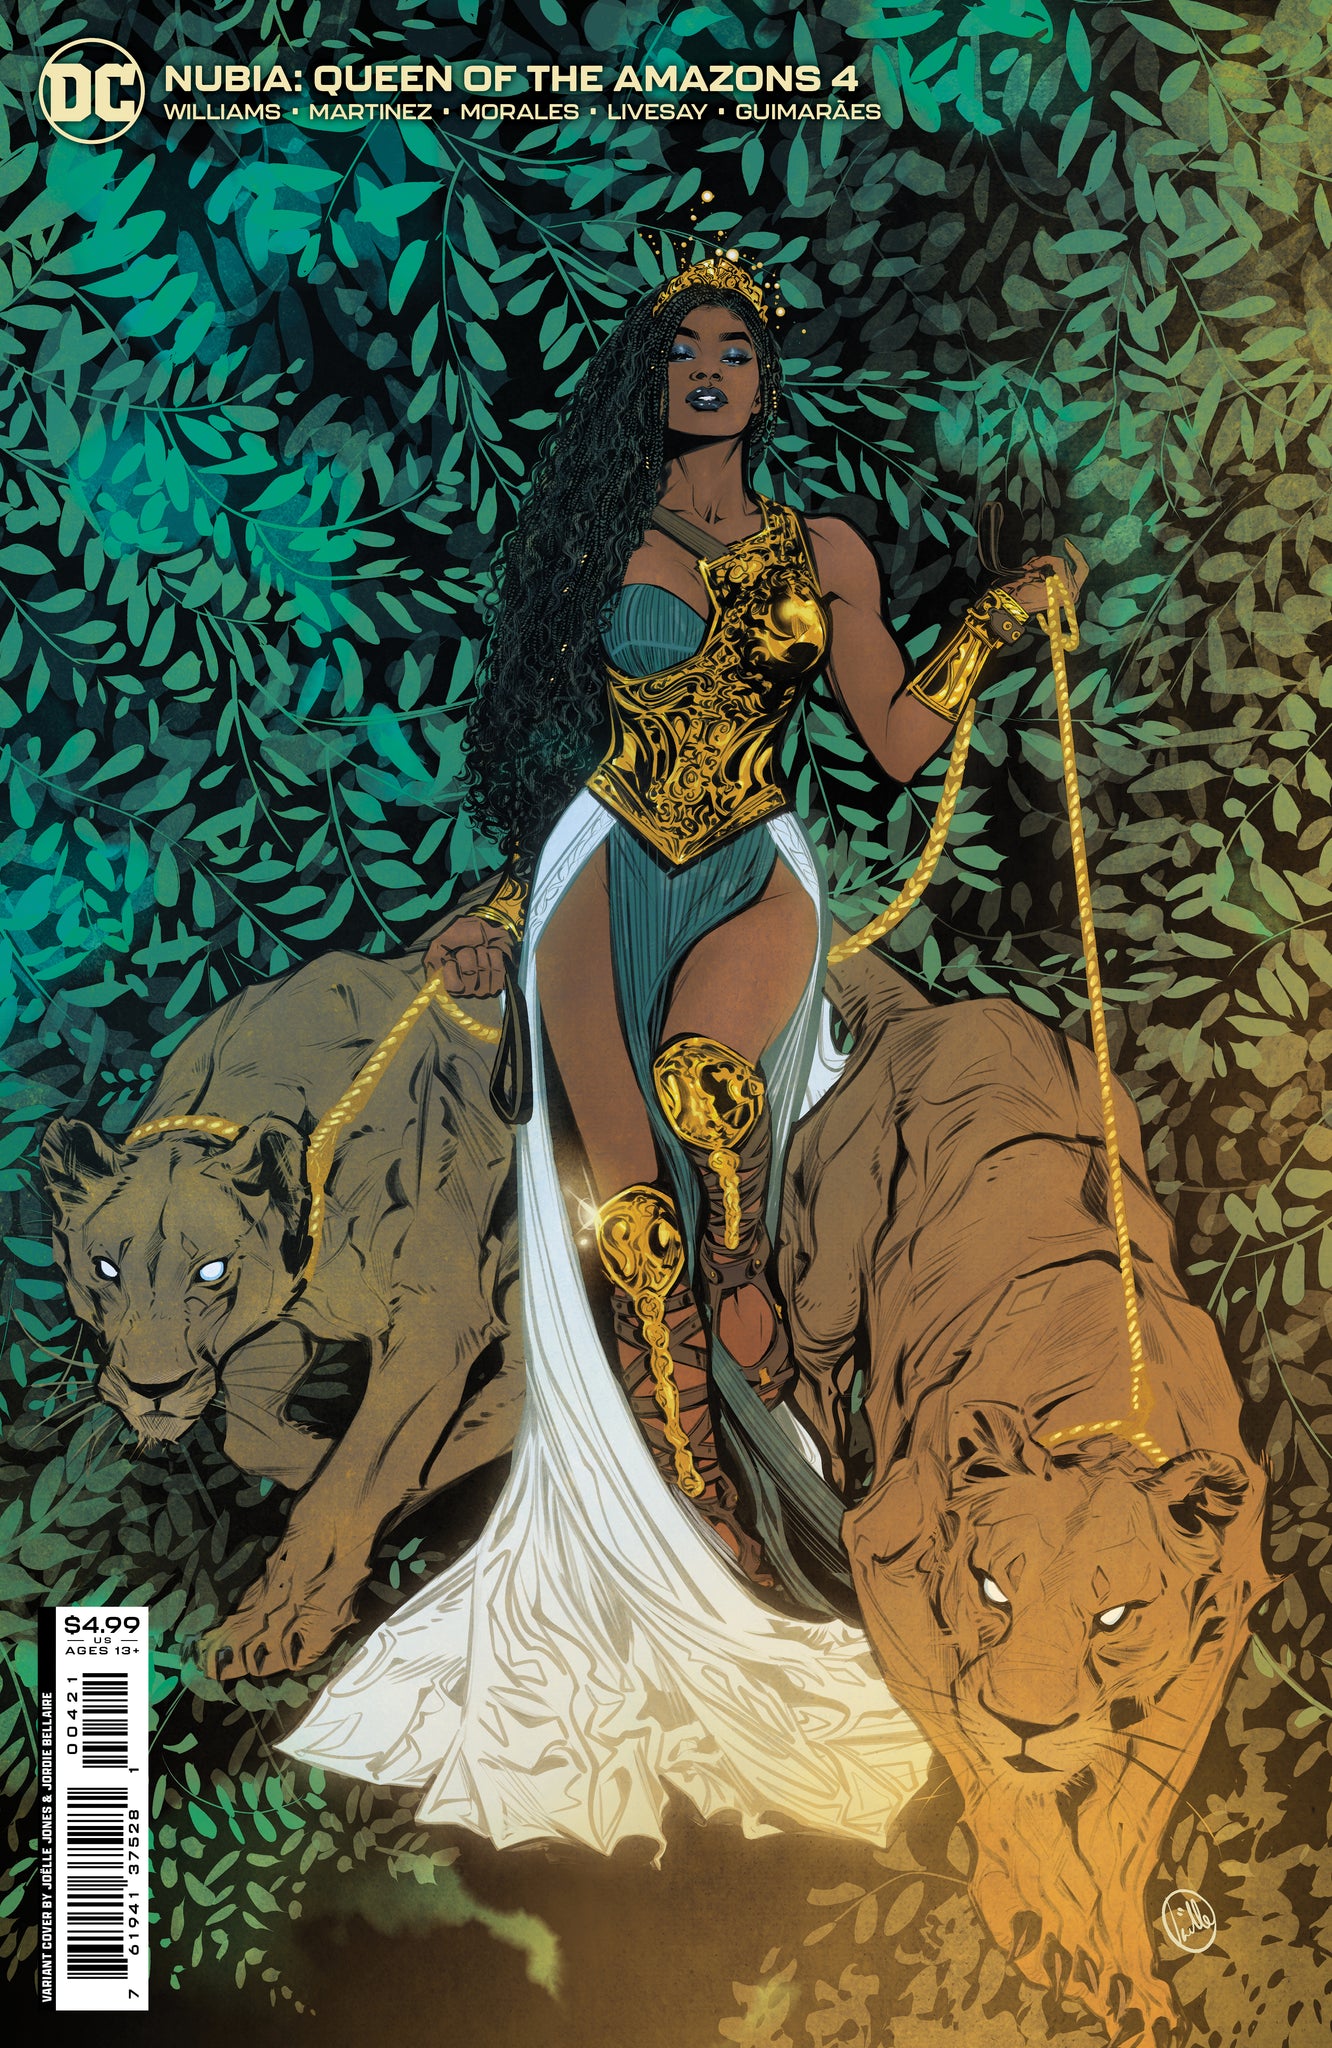 NUBIA QUEEN OF THE AMAZONS #4 (OF 4)